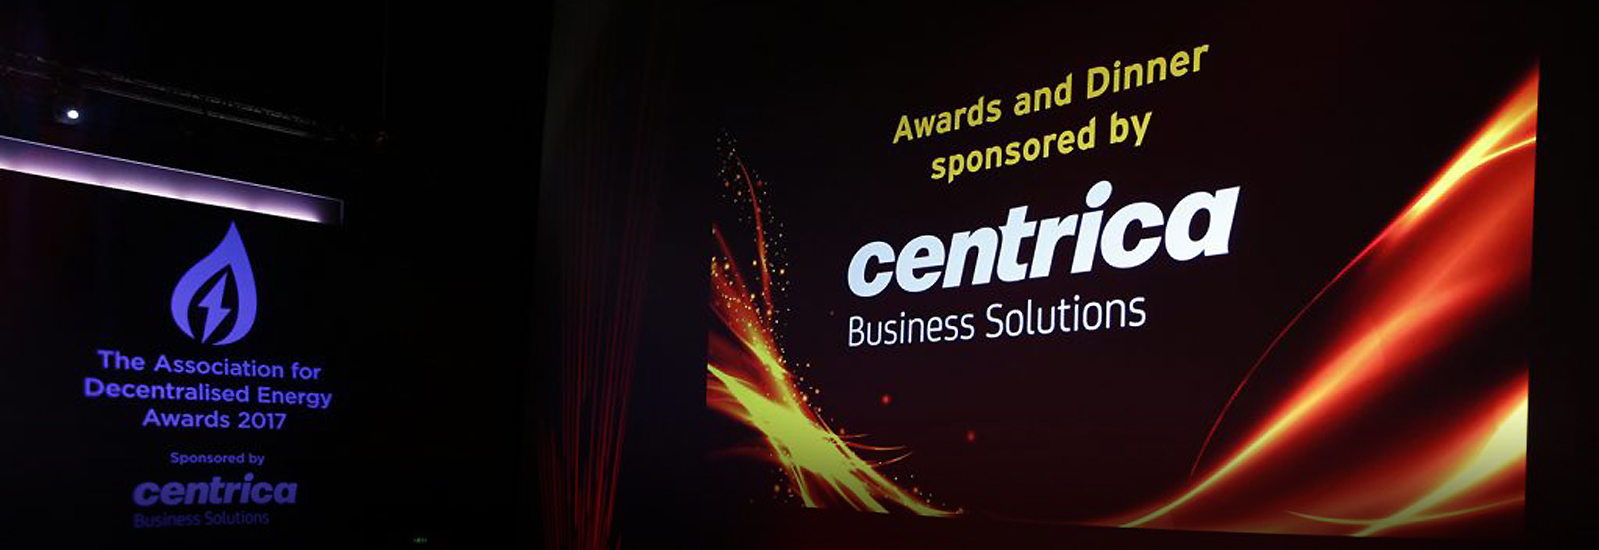 A screen displaying 'Awards and Dinner sponsored by Centrica Business Solutions' at Association for Decentralised Energy 50th Anniversary